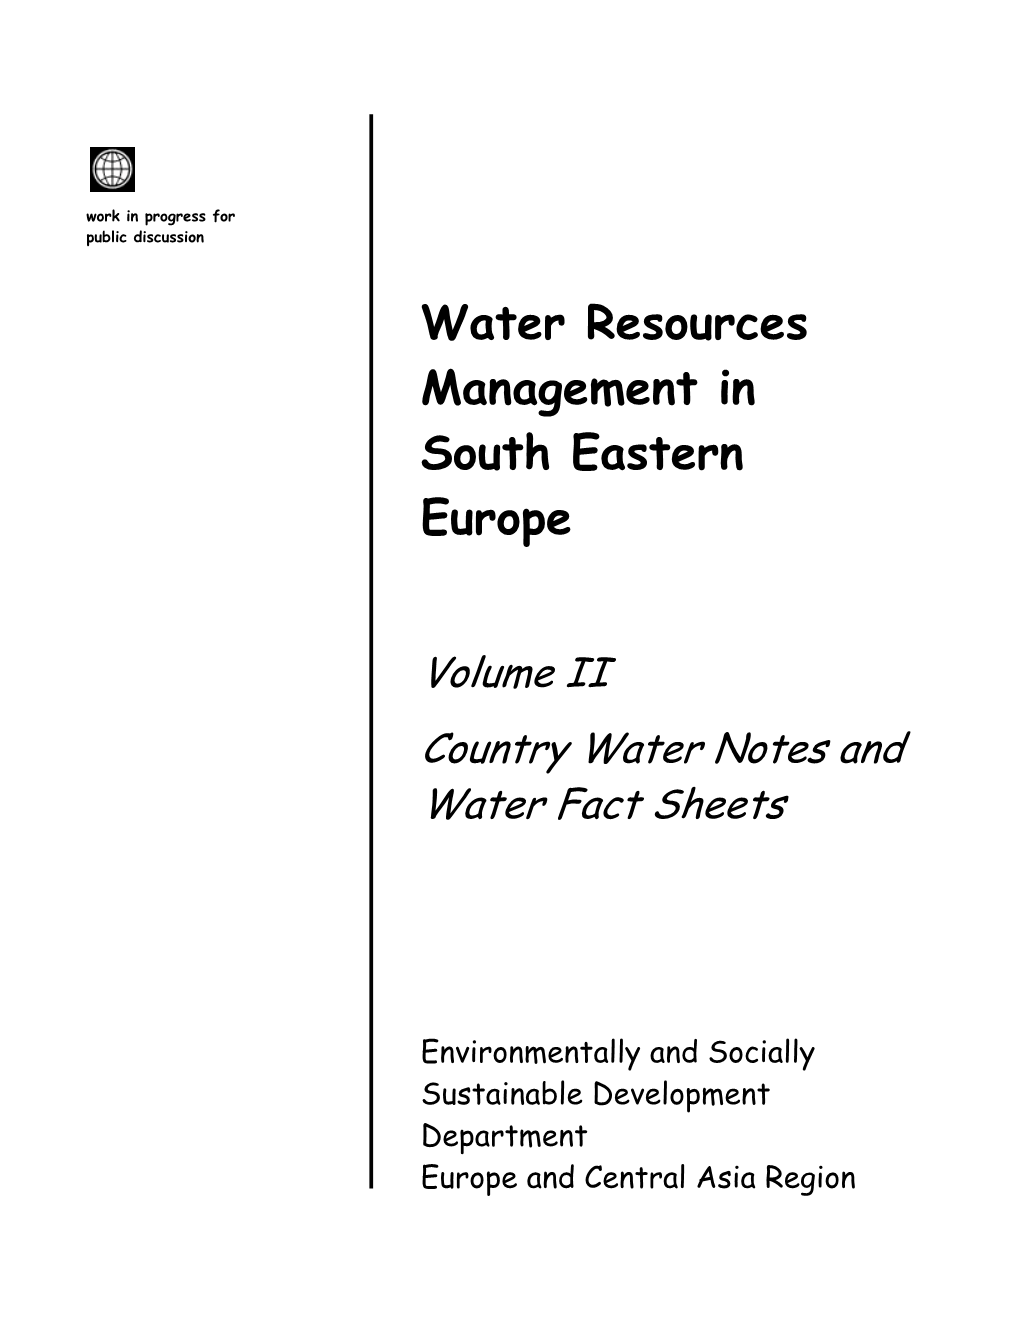 Water Resources Management in South Eastern Europe